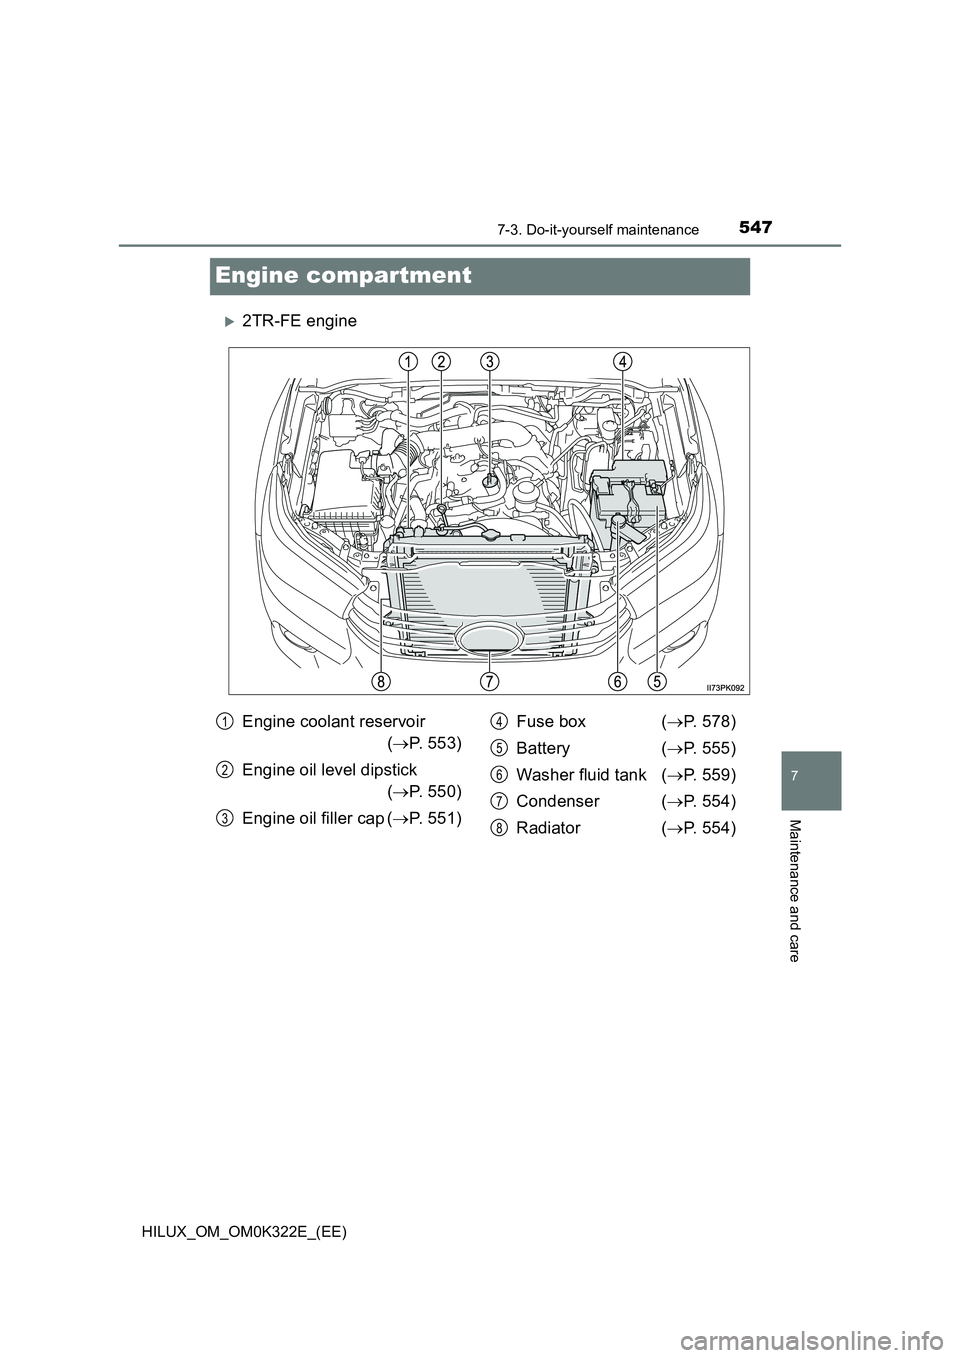 TOYOTA HILUX 2017  Owners Manual (in English) 5477-3. Do-it-yourself maintenance
HILUX_OM_OM0K322E_(EE)
7
Maintenance and care
Engine compartment
2TR-FE engine
Engine coolant reservoir  
( P. 553) 
Engine oil level dipstick  
 ( P. 550) 